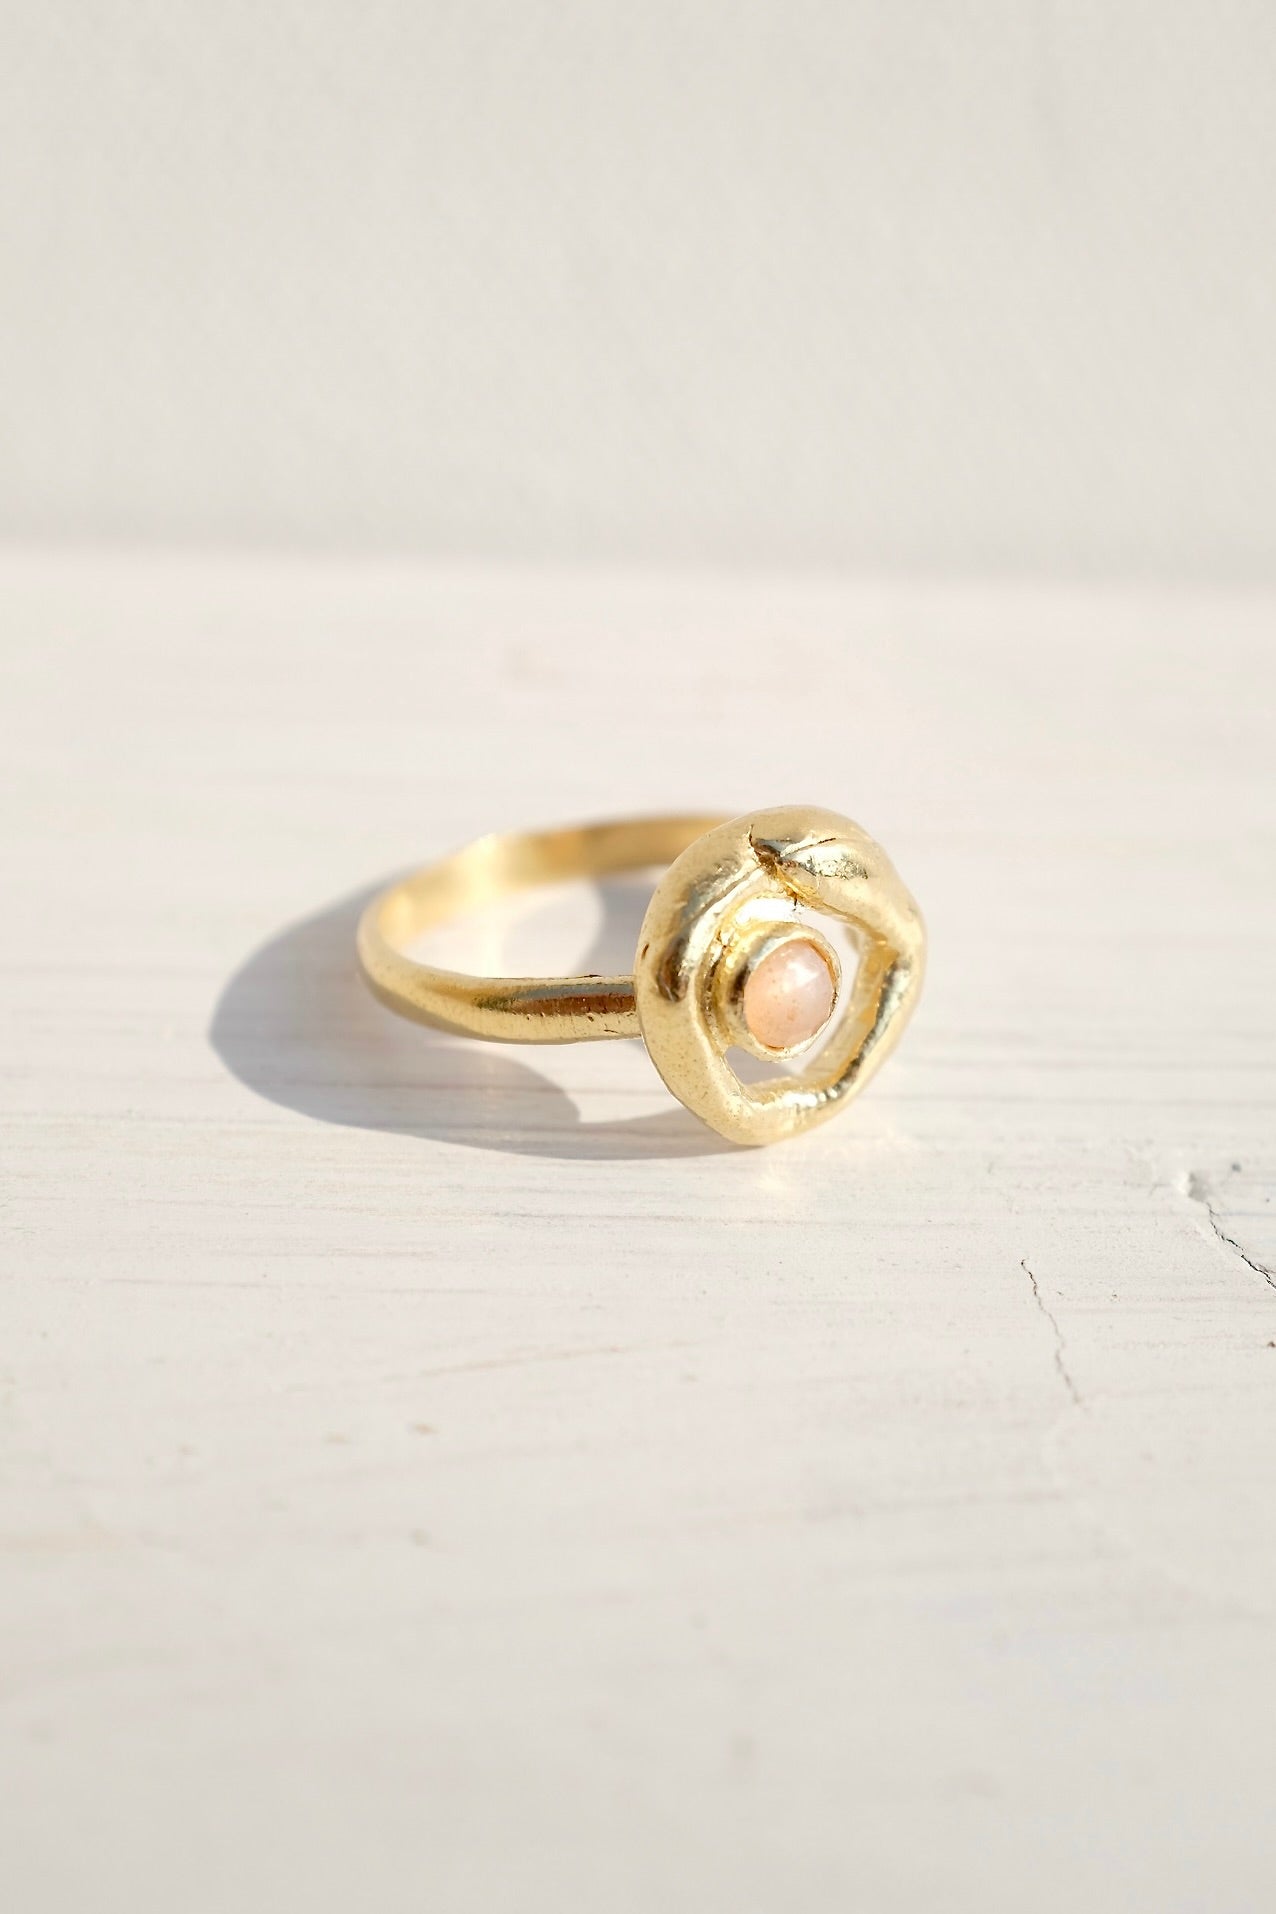 Mercurial Oracle Ring / Gold Plate + Peach Moonstone